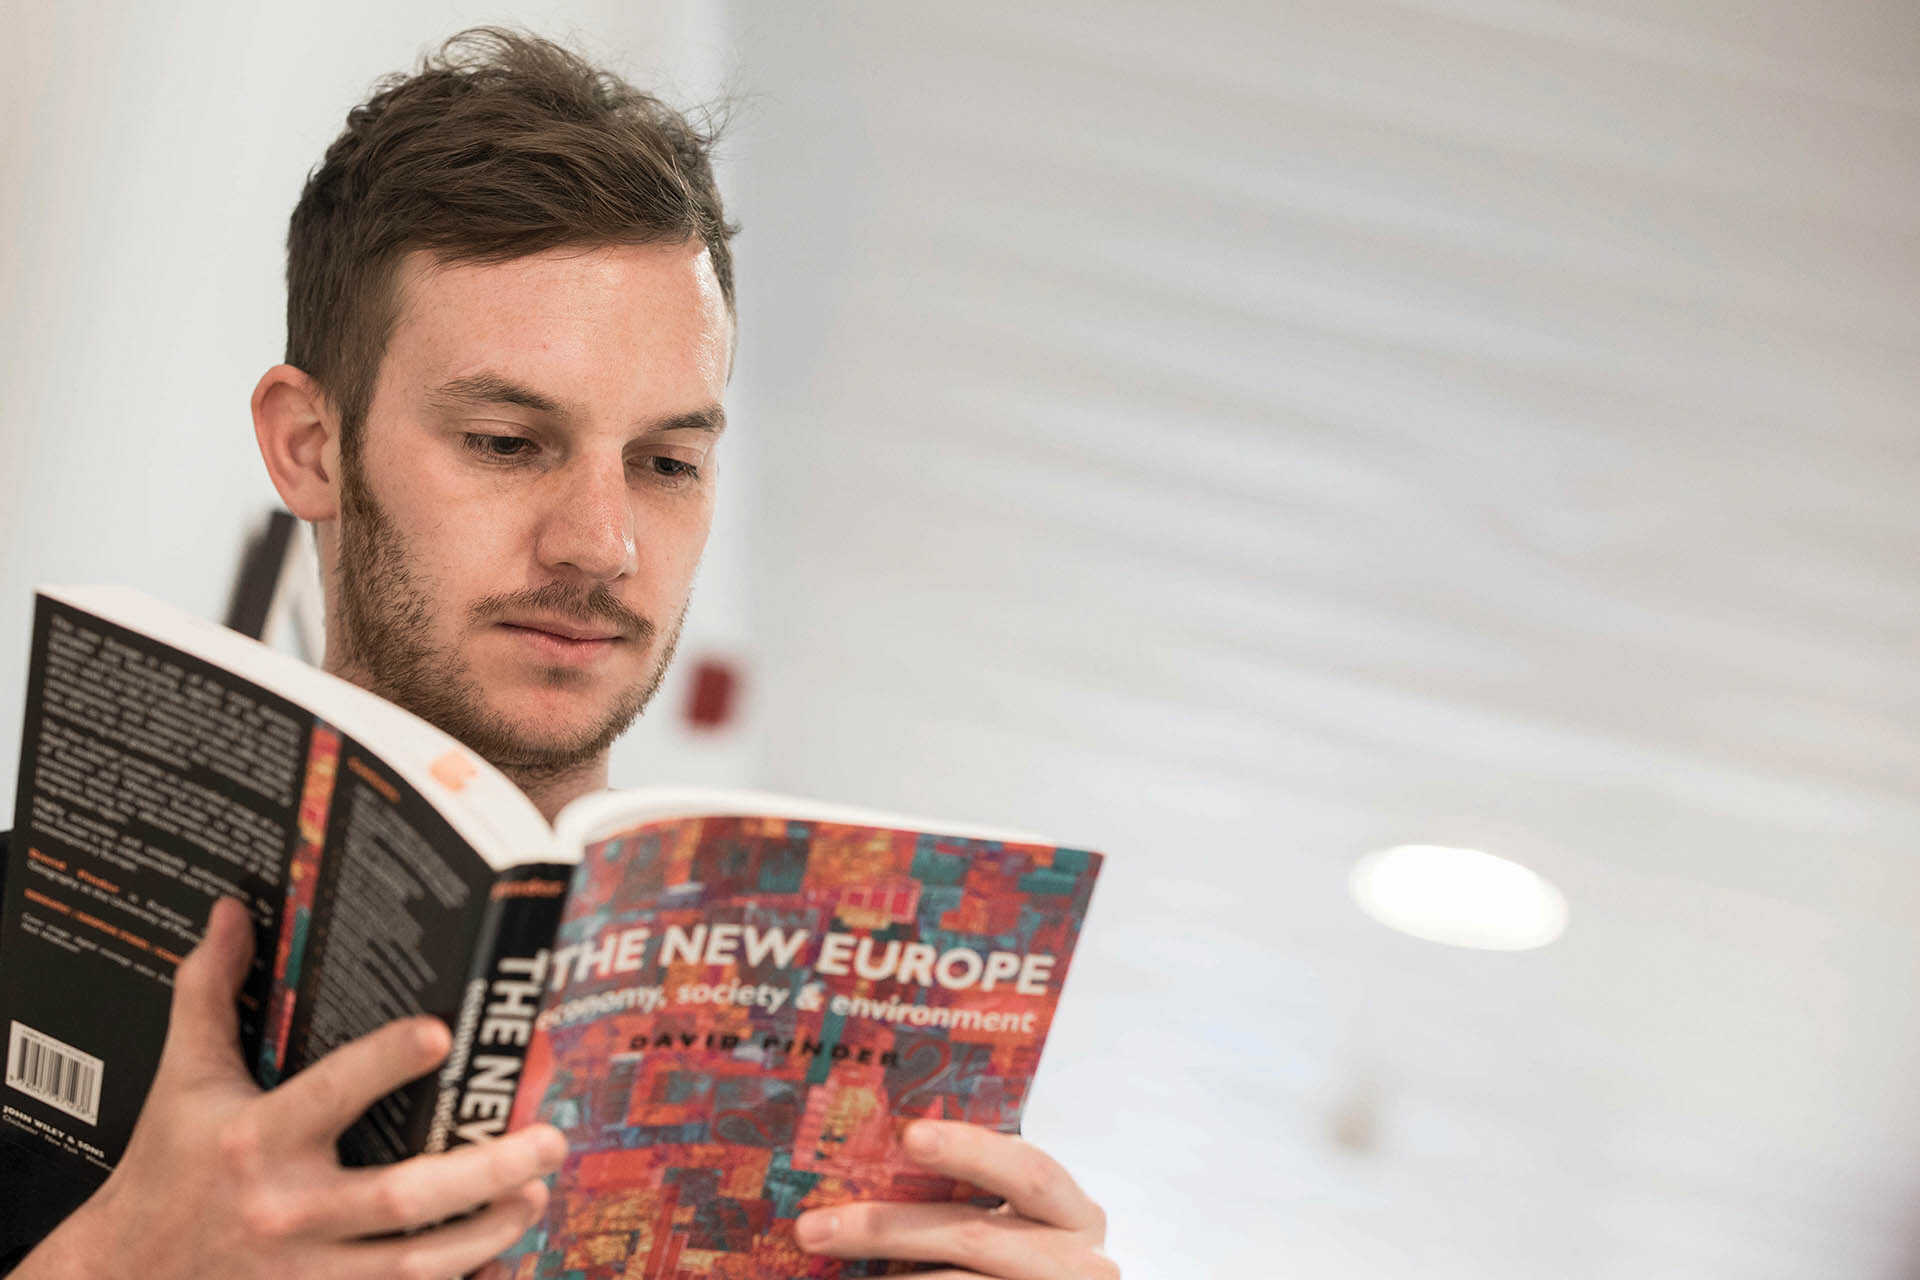 Research student reads a paperback copy of The New Europe